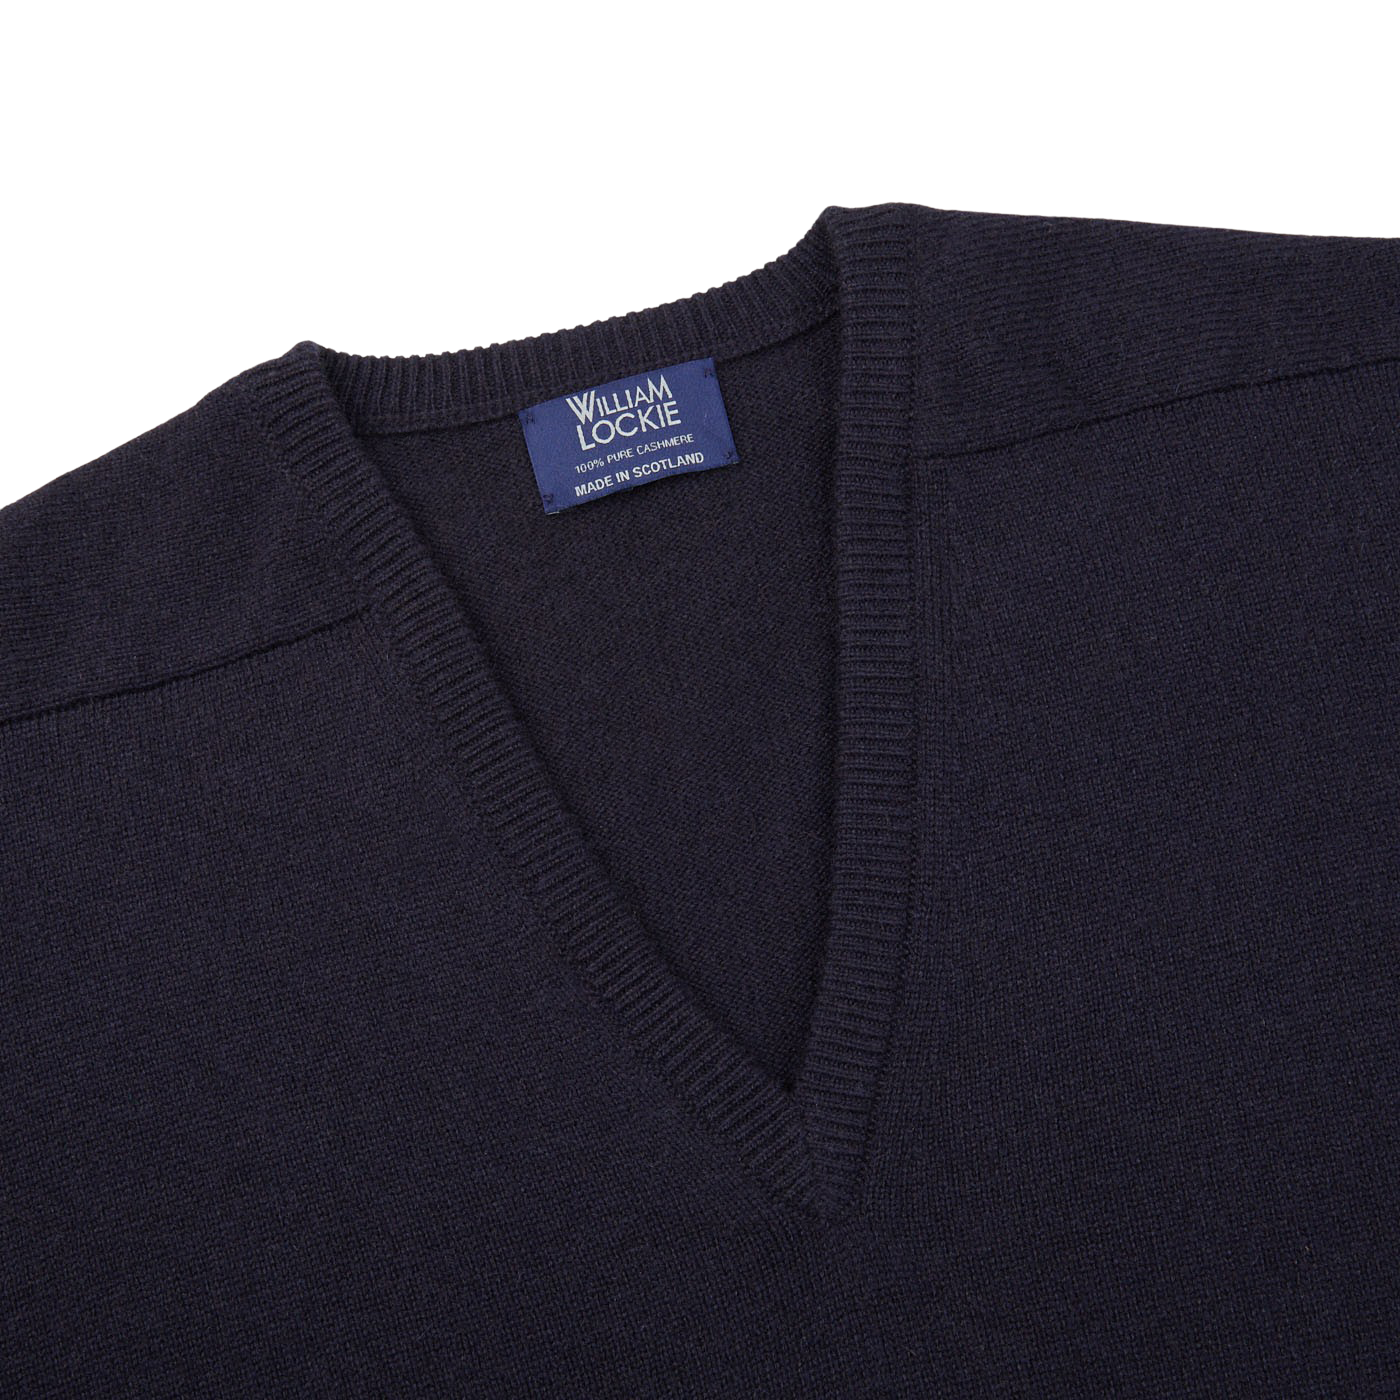 The William Lockie navy v-neck cashmere sweater, made from luxurious Scottish cashmere, is shown on a white background with its ribbed hems prominently displayed.